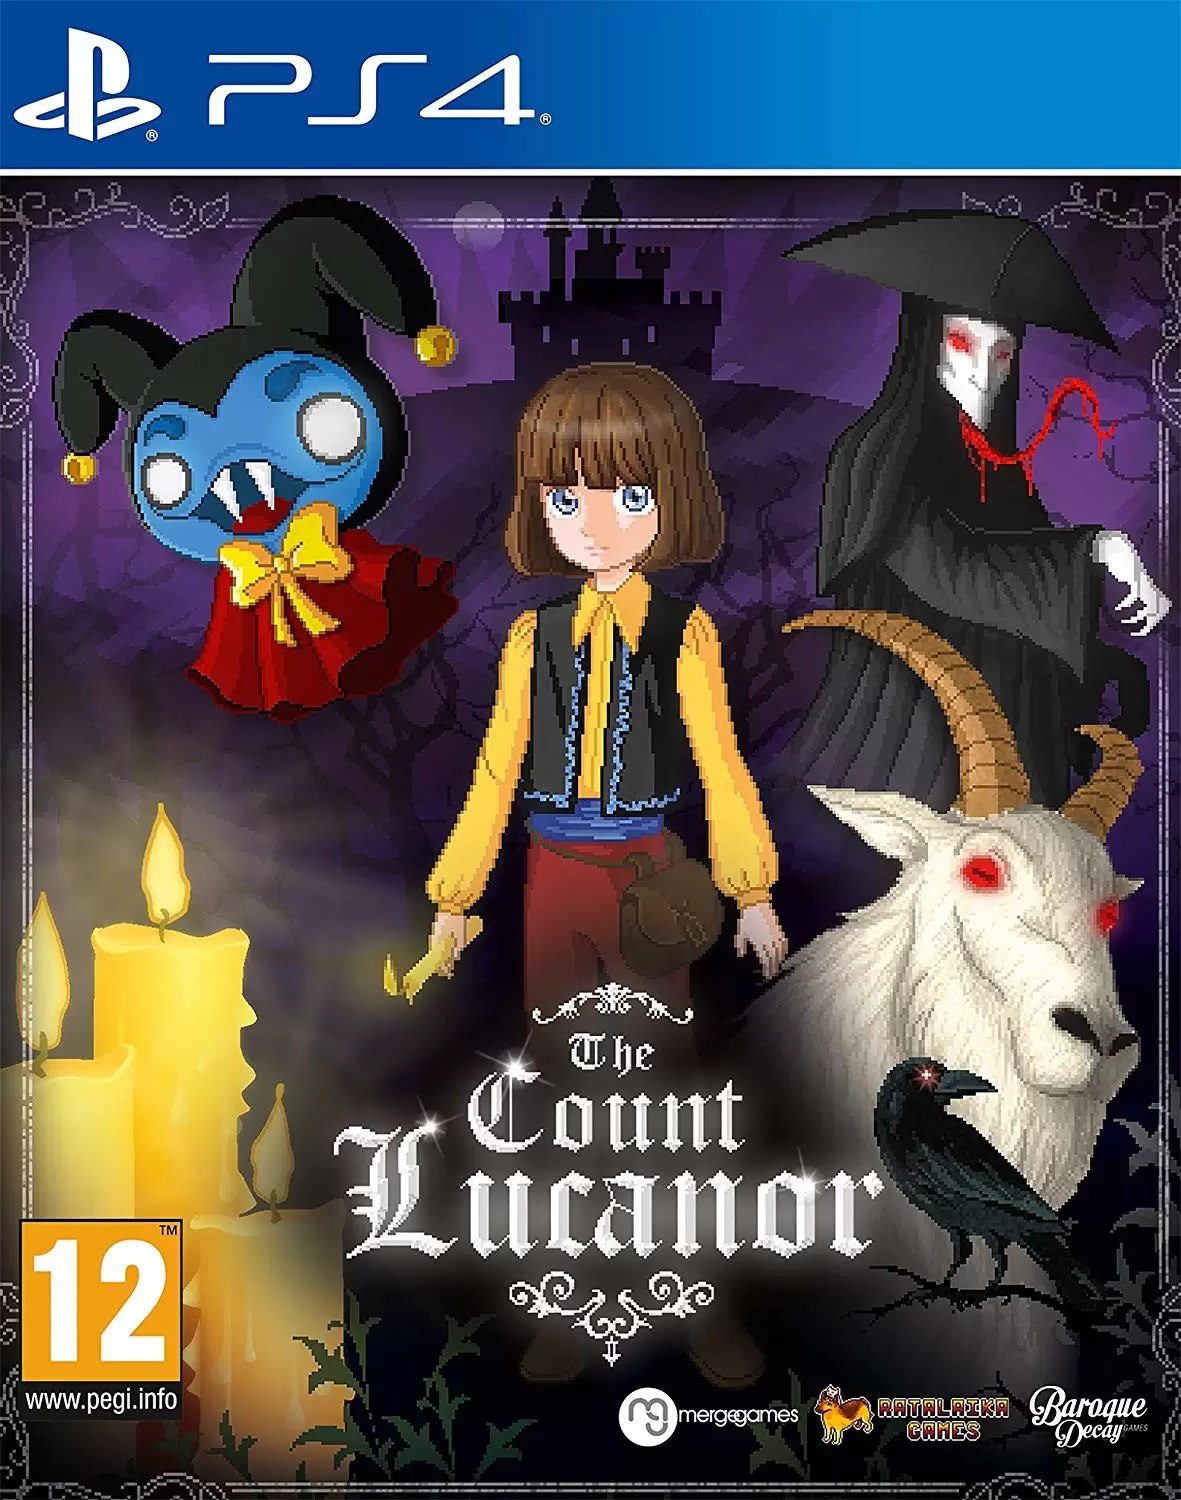 PS4 Games - The Count Lucanor